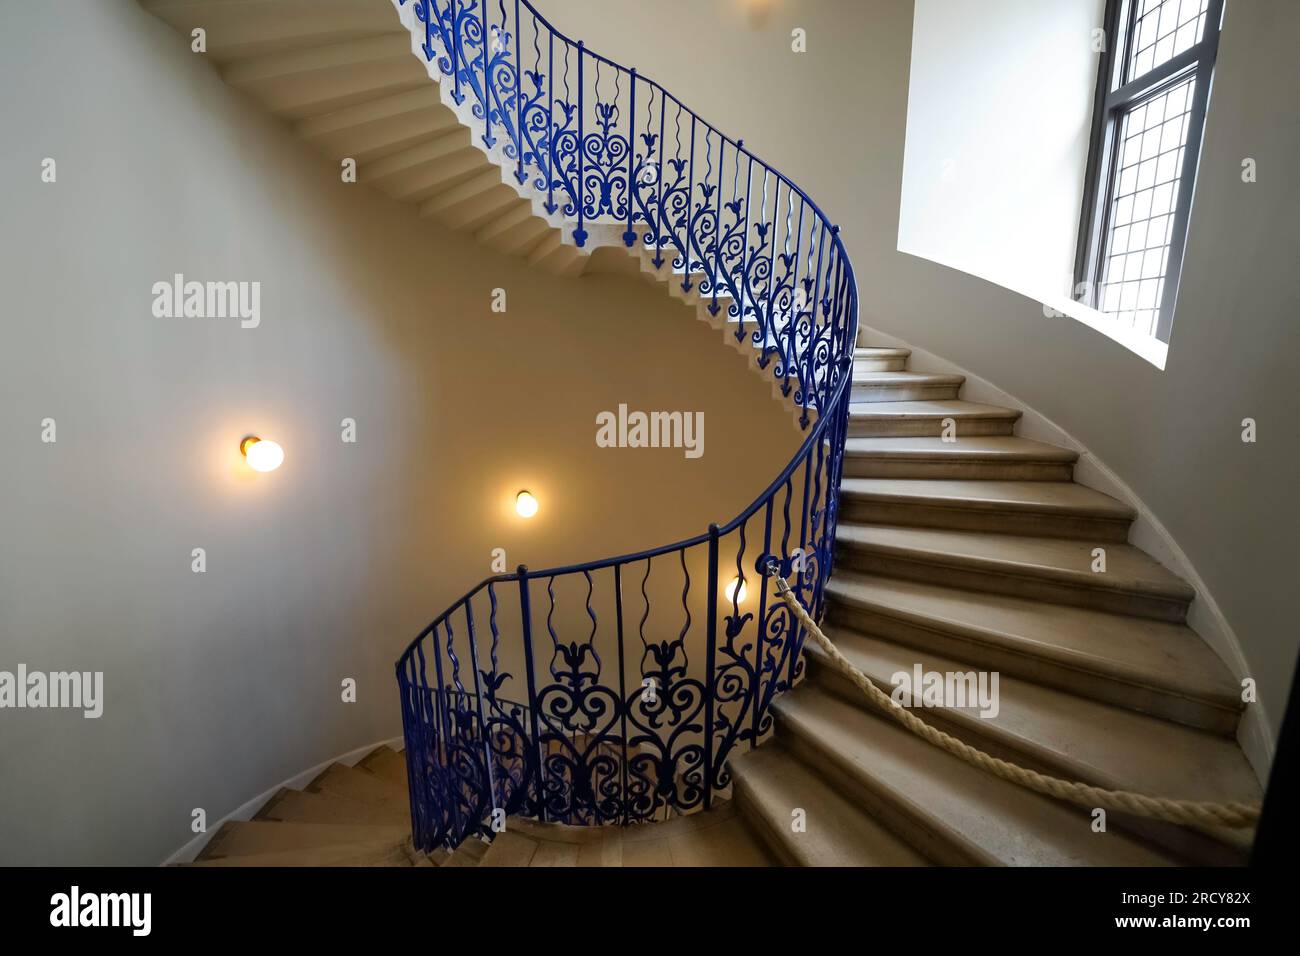 Queen's House, Greenwich, London. Interior of the circular staircase. Formerly a royal residence, now an art museum, gallery with amazing architecture Stock Photo